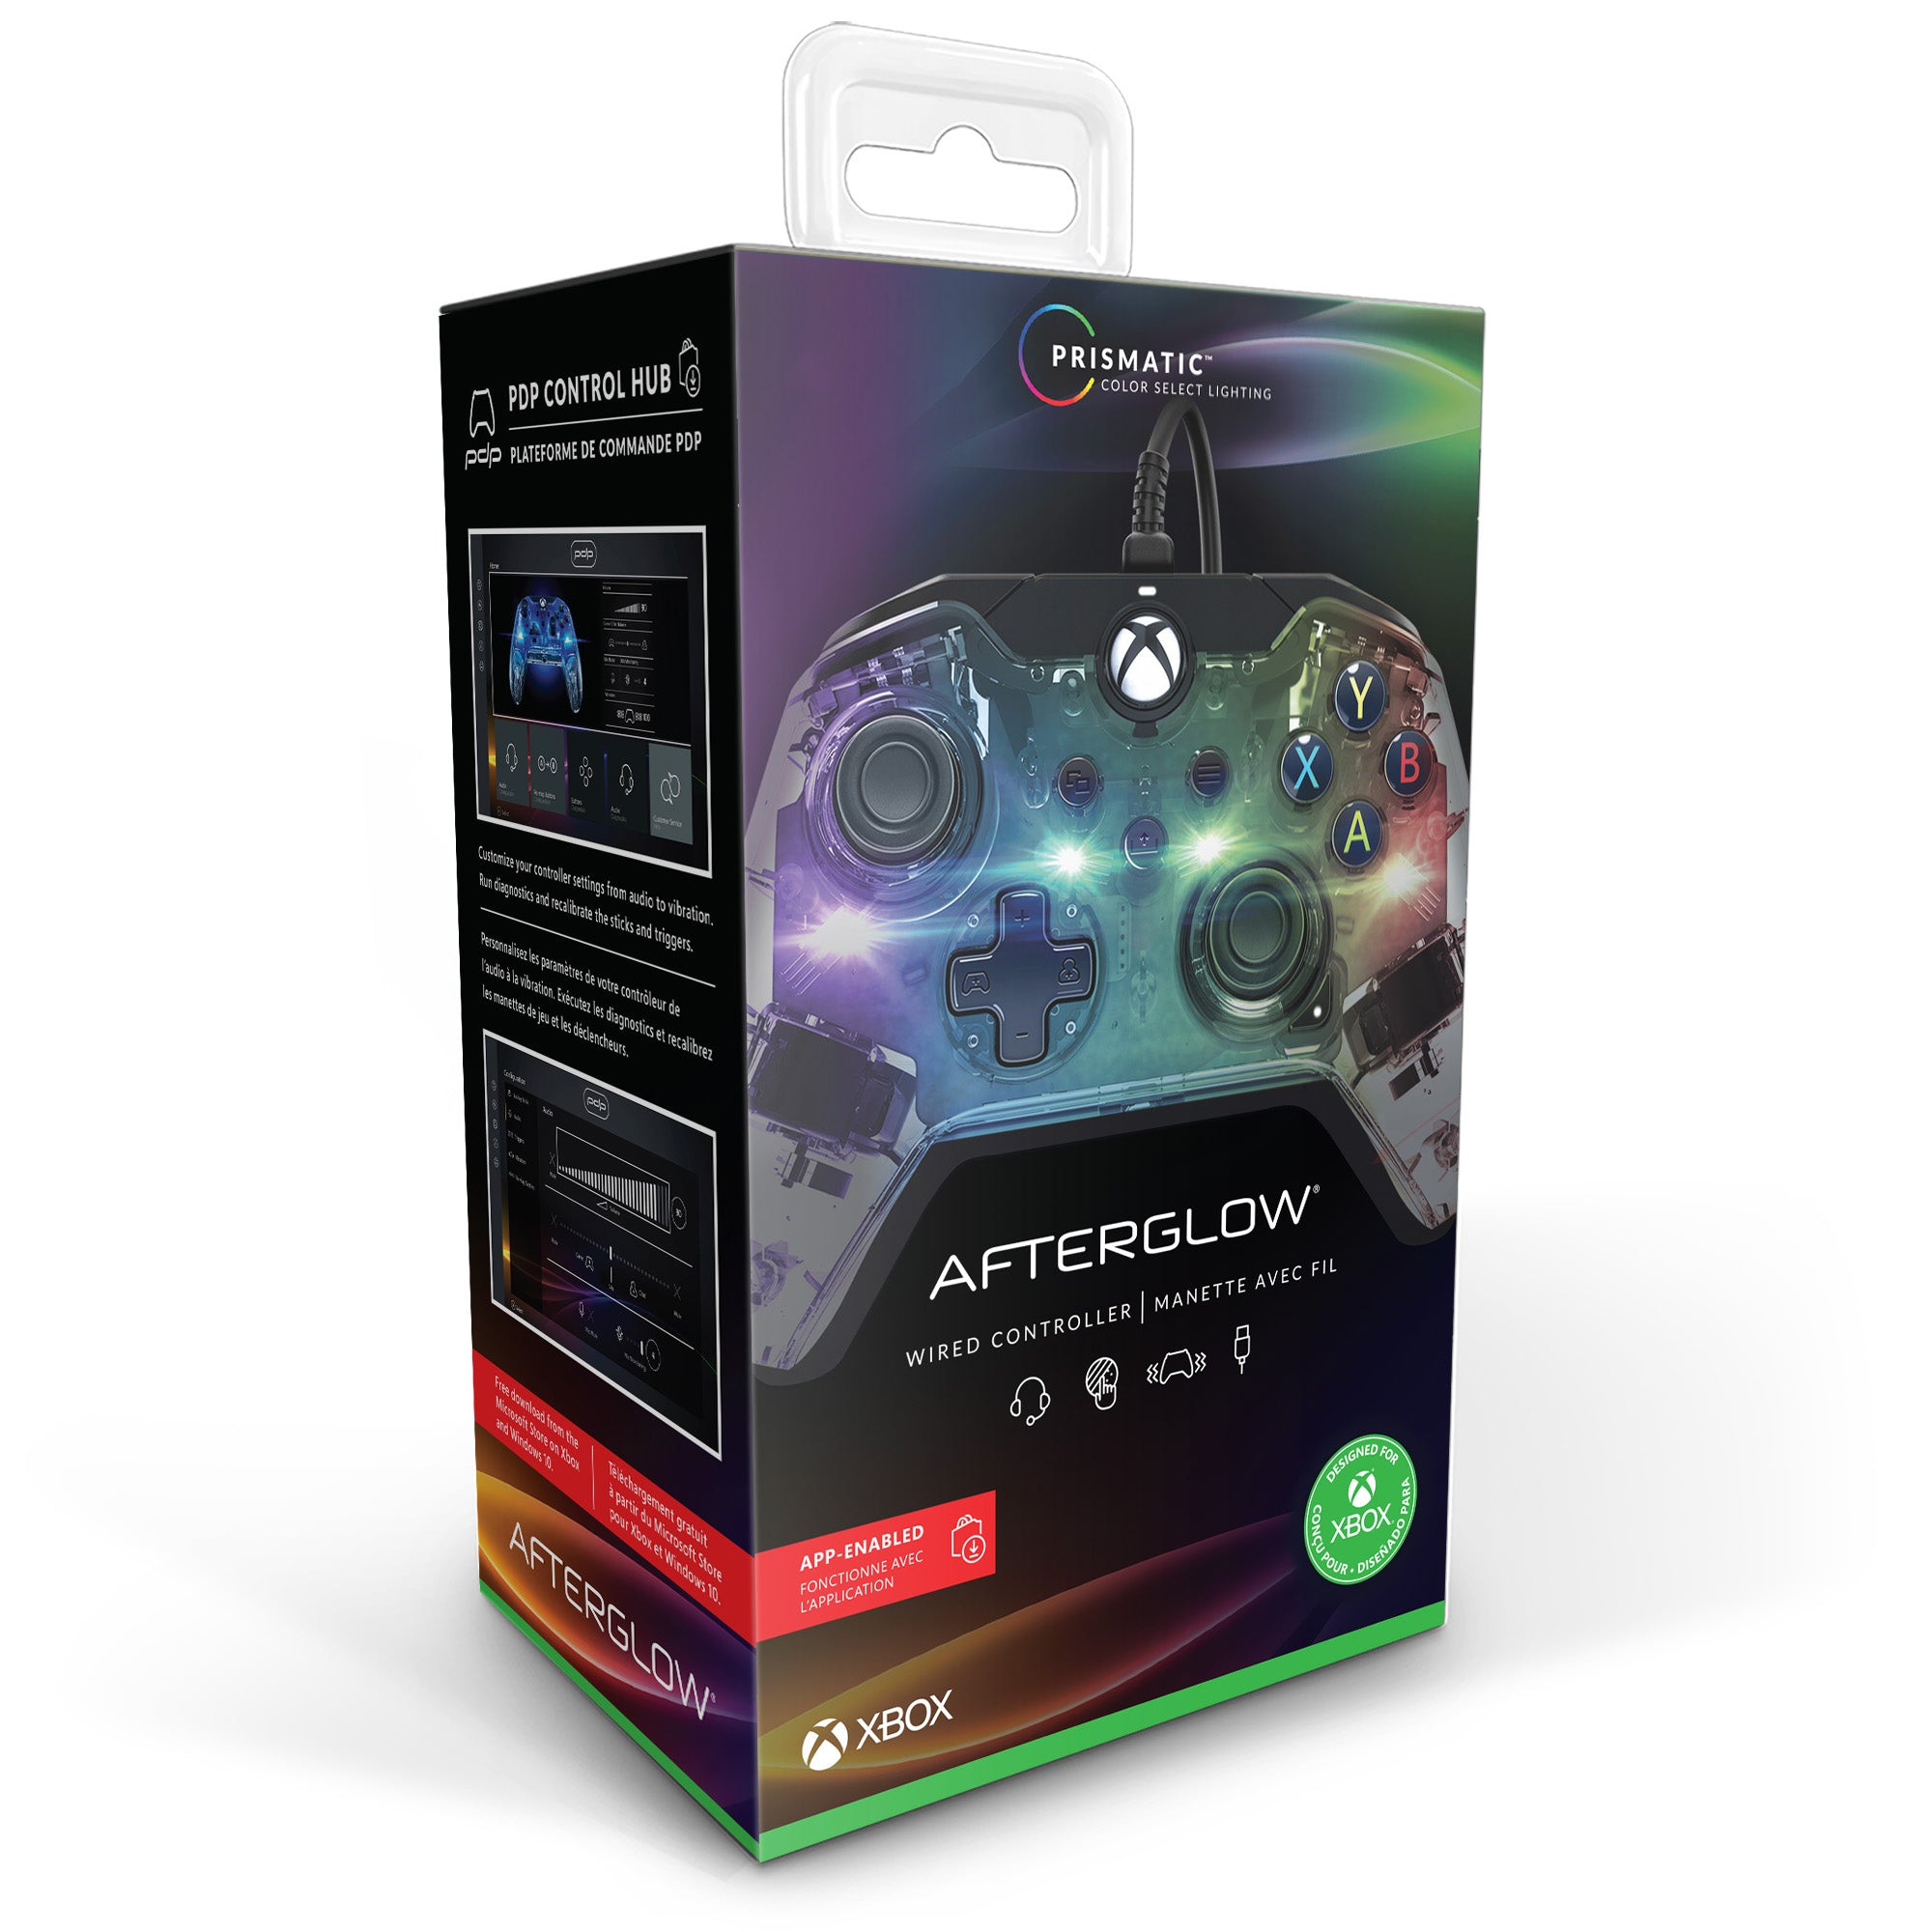 Ag Prismatic Wired Controller